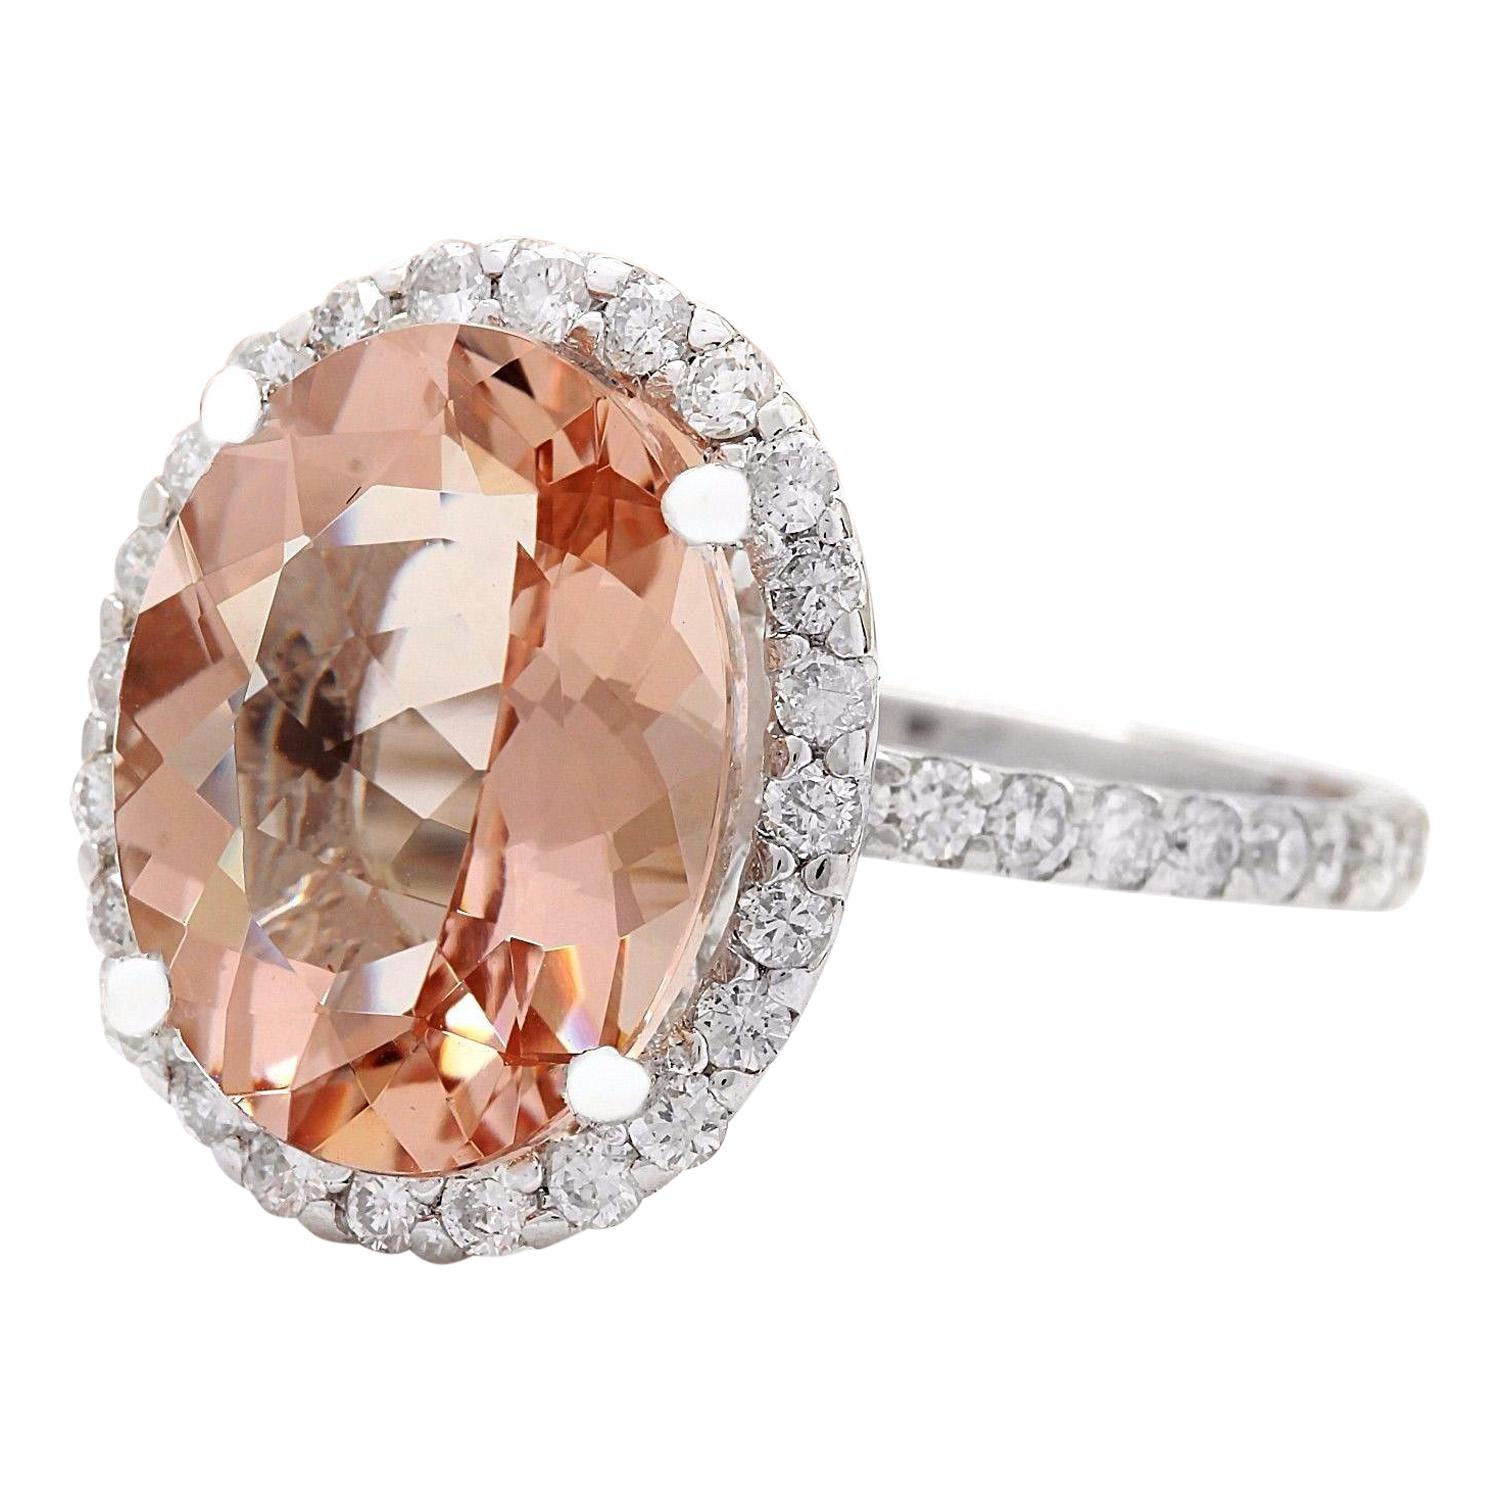 Presenting our stunning 6.57 Carat Natural Morganite 14K Solid White Gold Diamond Ring, an embodiment of grace and refinement.
Crafted from 14K white gold, this ring features a captivating oval-shaped morganite stone weighing 5.67 carats, set amidst